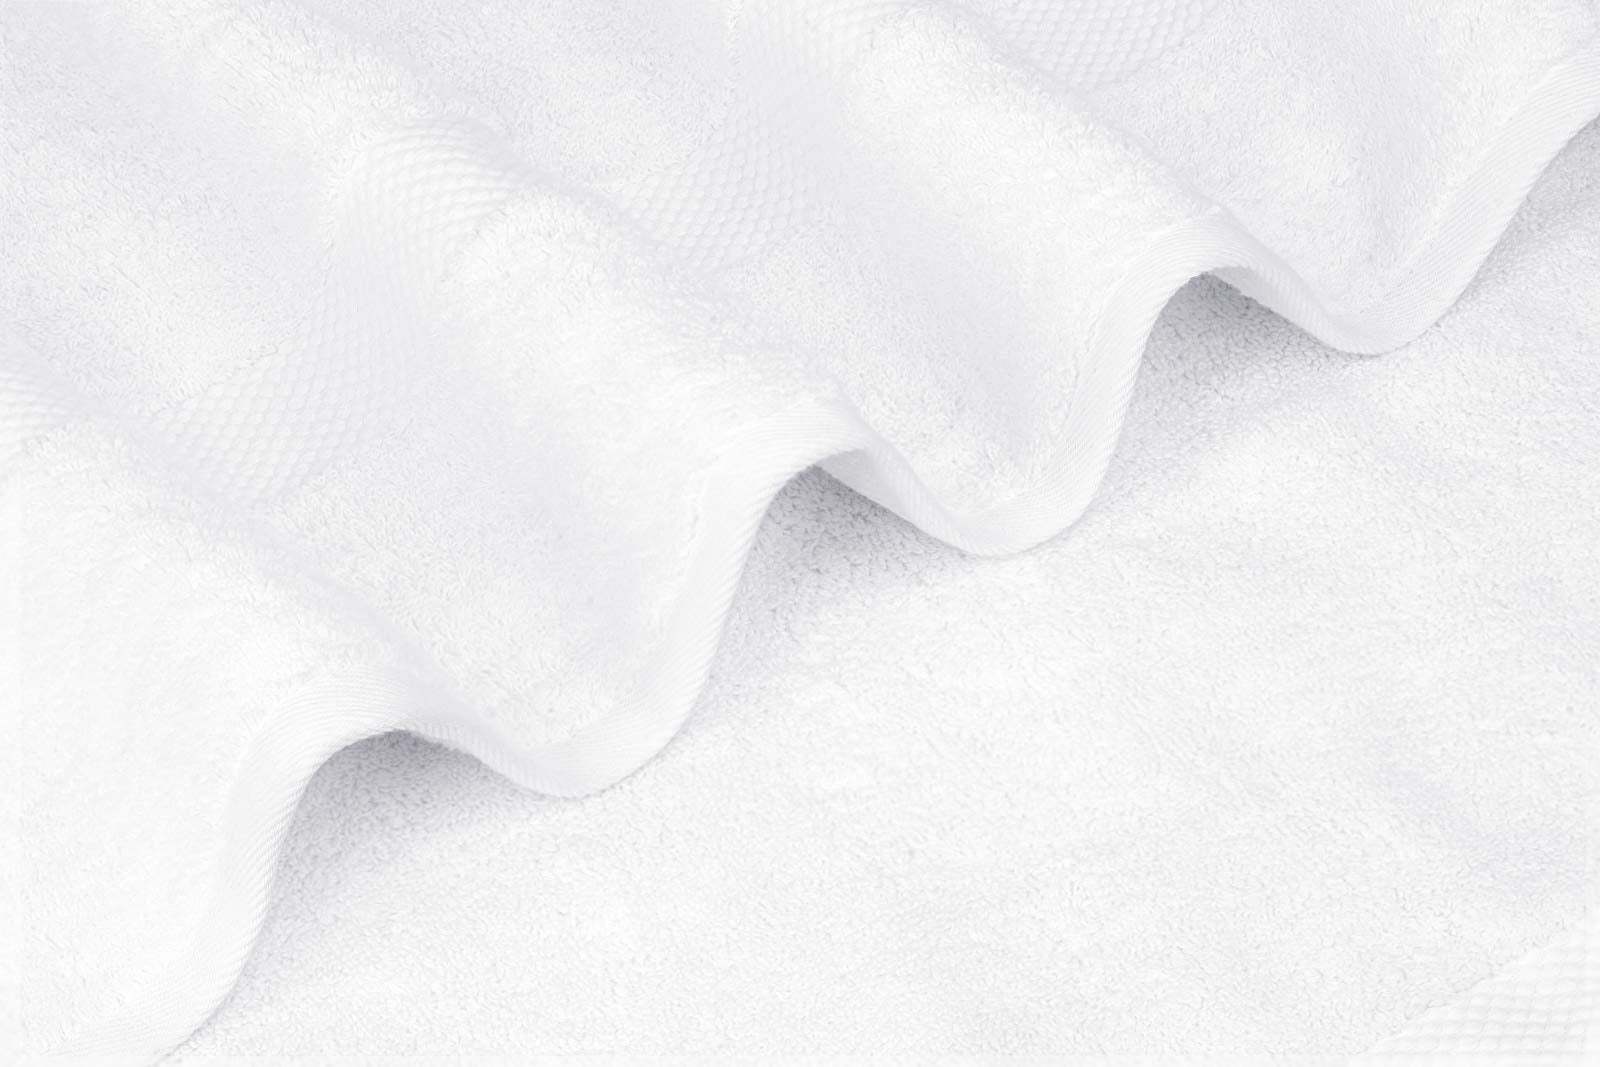 Luxury White Bath Towels Large - 100% Soft Cotton 700 GSM | Absorbent Hotel Bathroom Towel | 27 inch X 54 inch | Set of 4 | Grey/White  - Like New